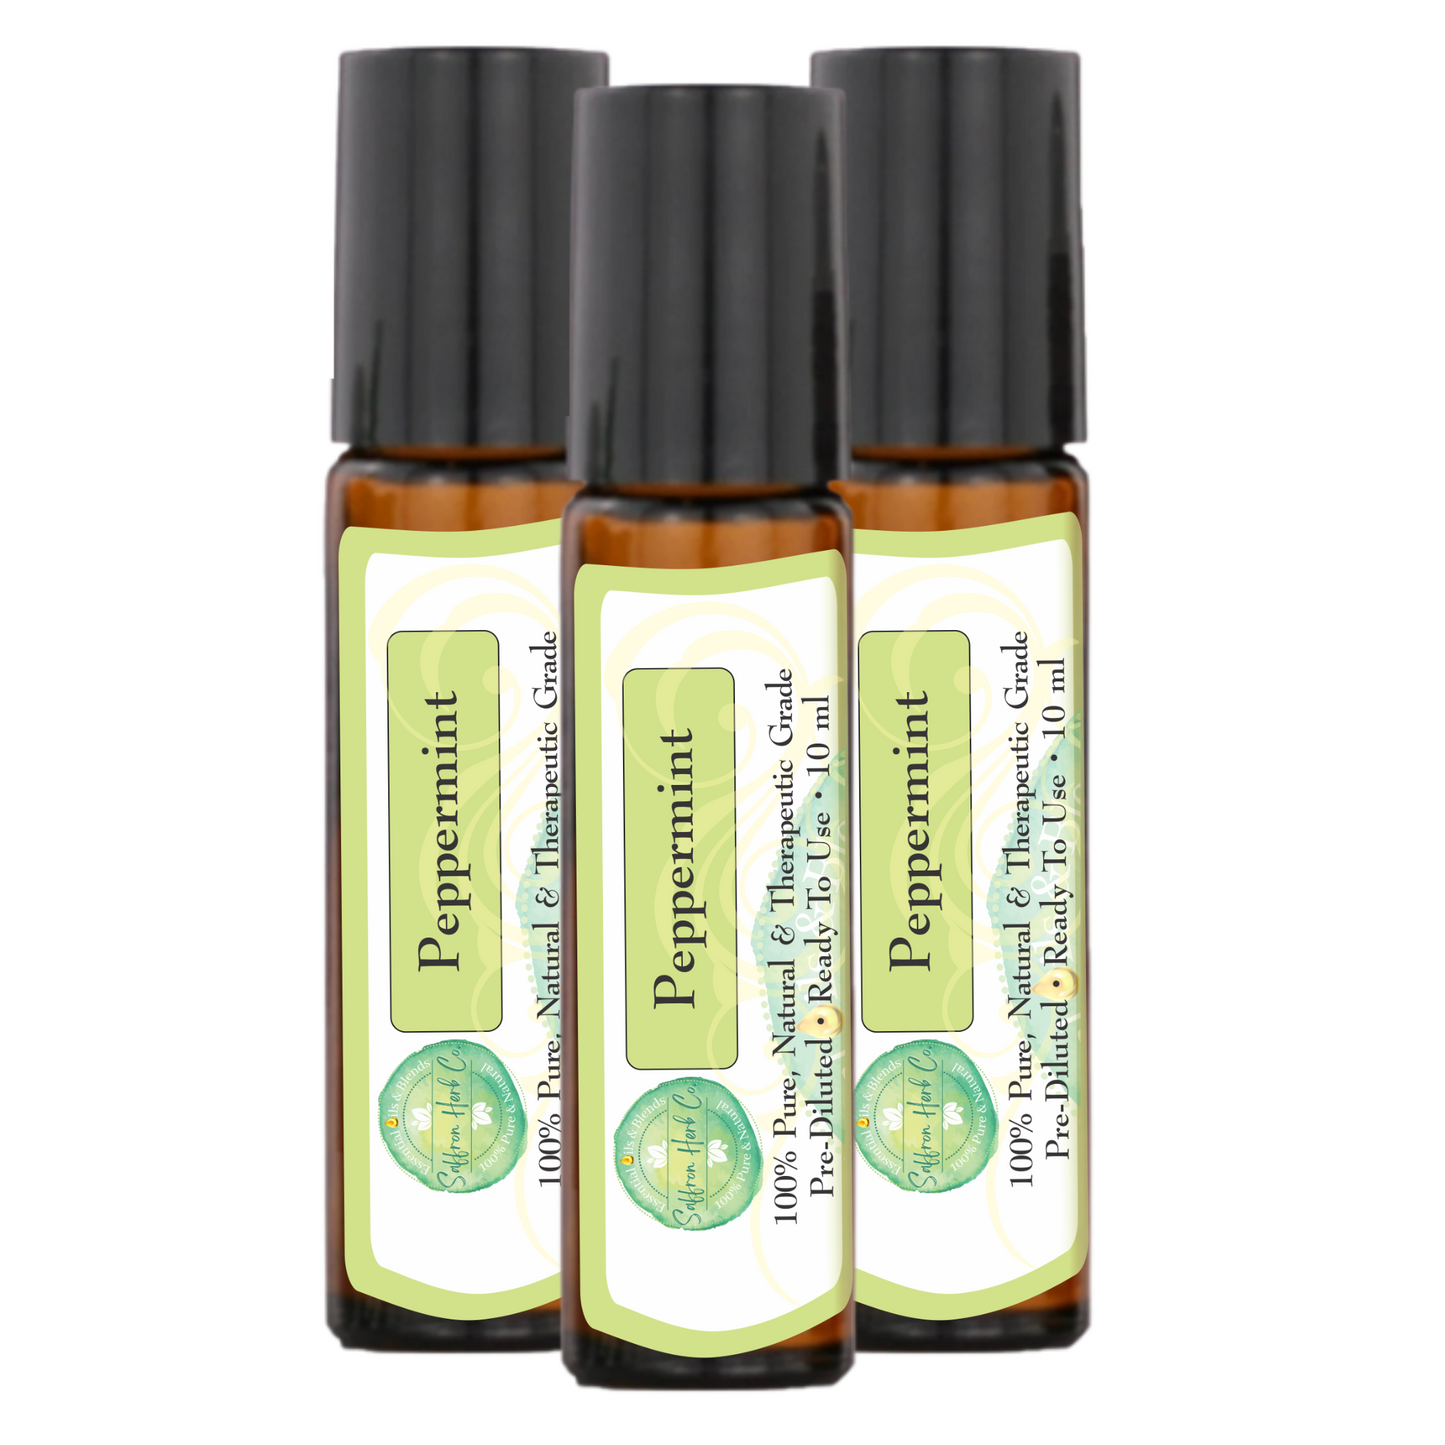 Peppermint Essential Oil Roller Bottle Blend • 100% Pure & Natural • Pre-Diluted • Ready To Use